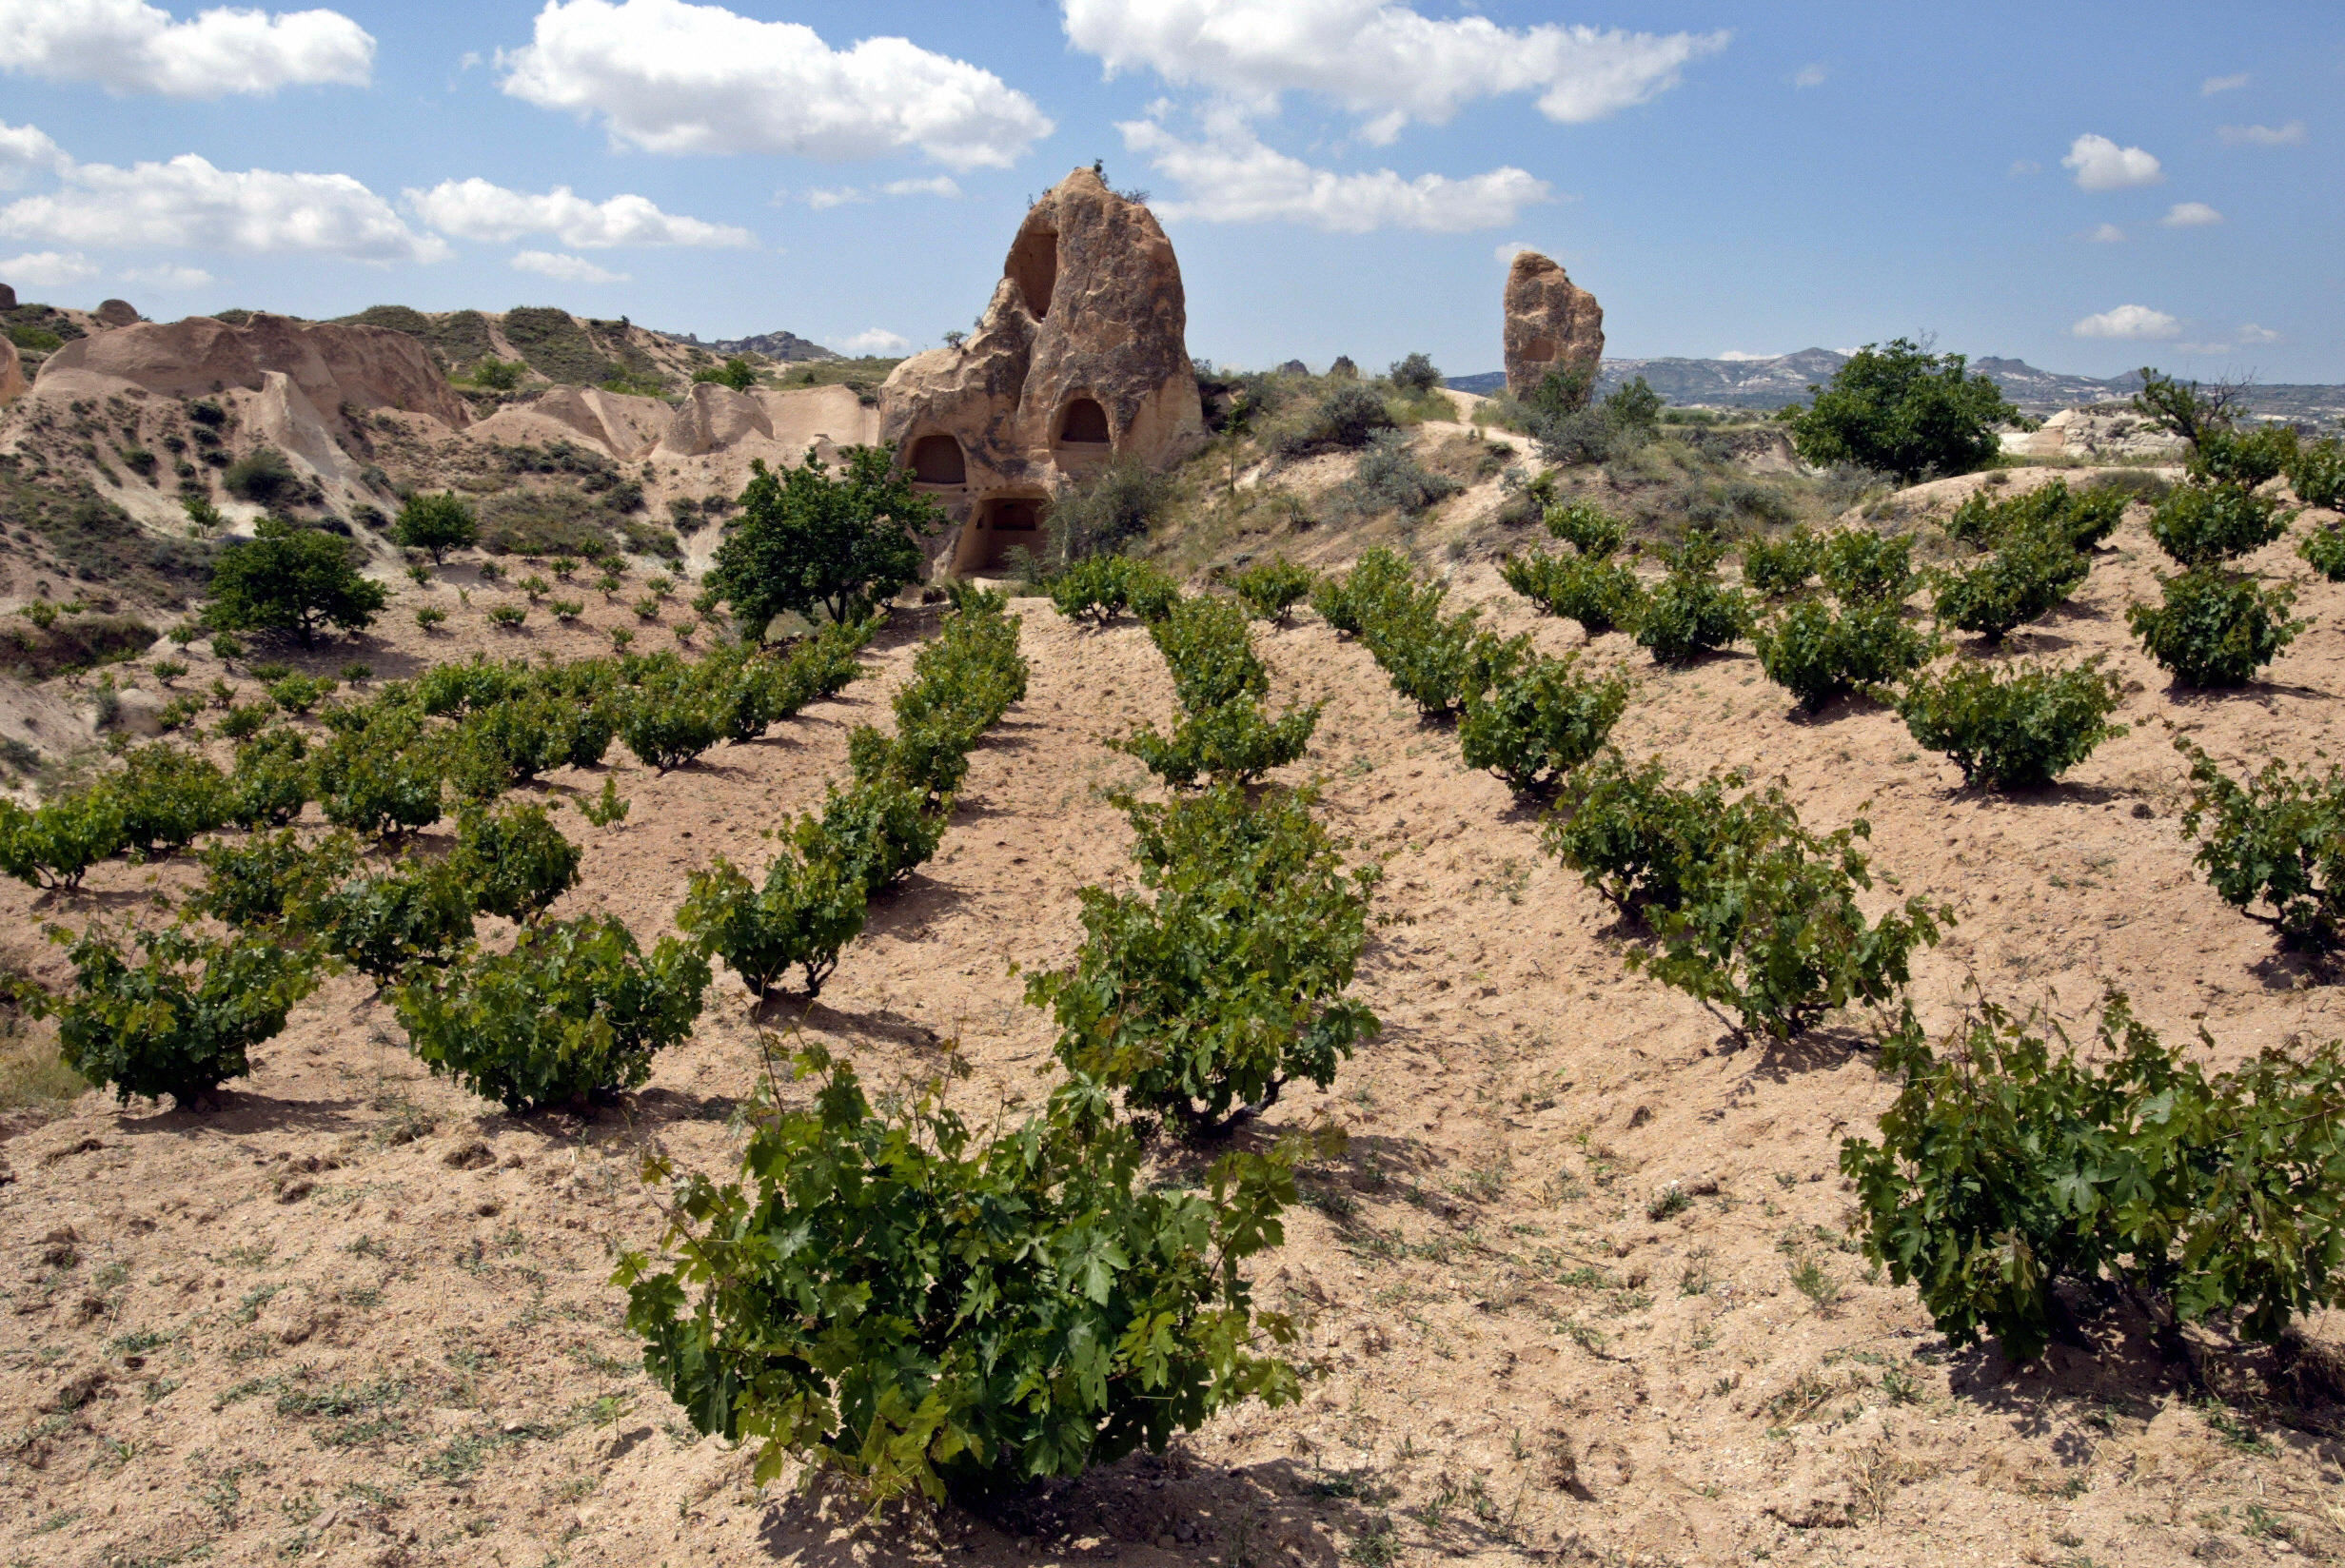 Turkish Winemakers Raise Their Glasses to Ancient Anatolian Traditions